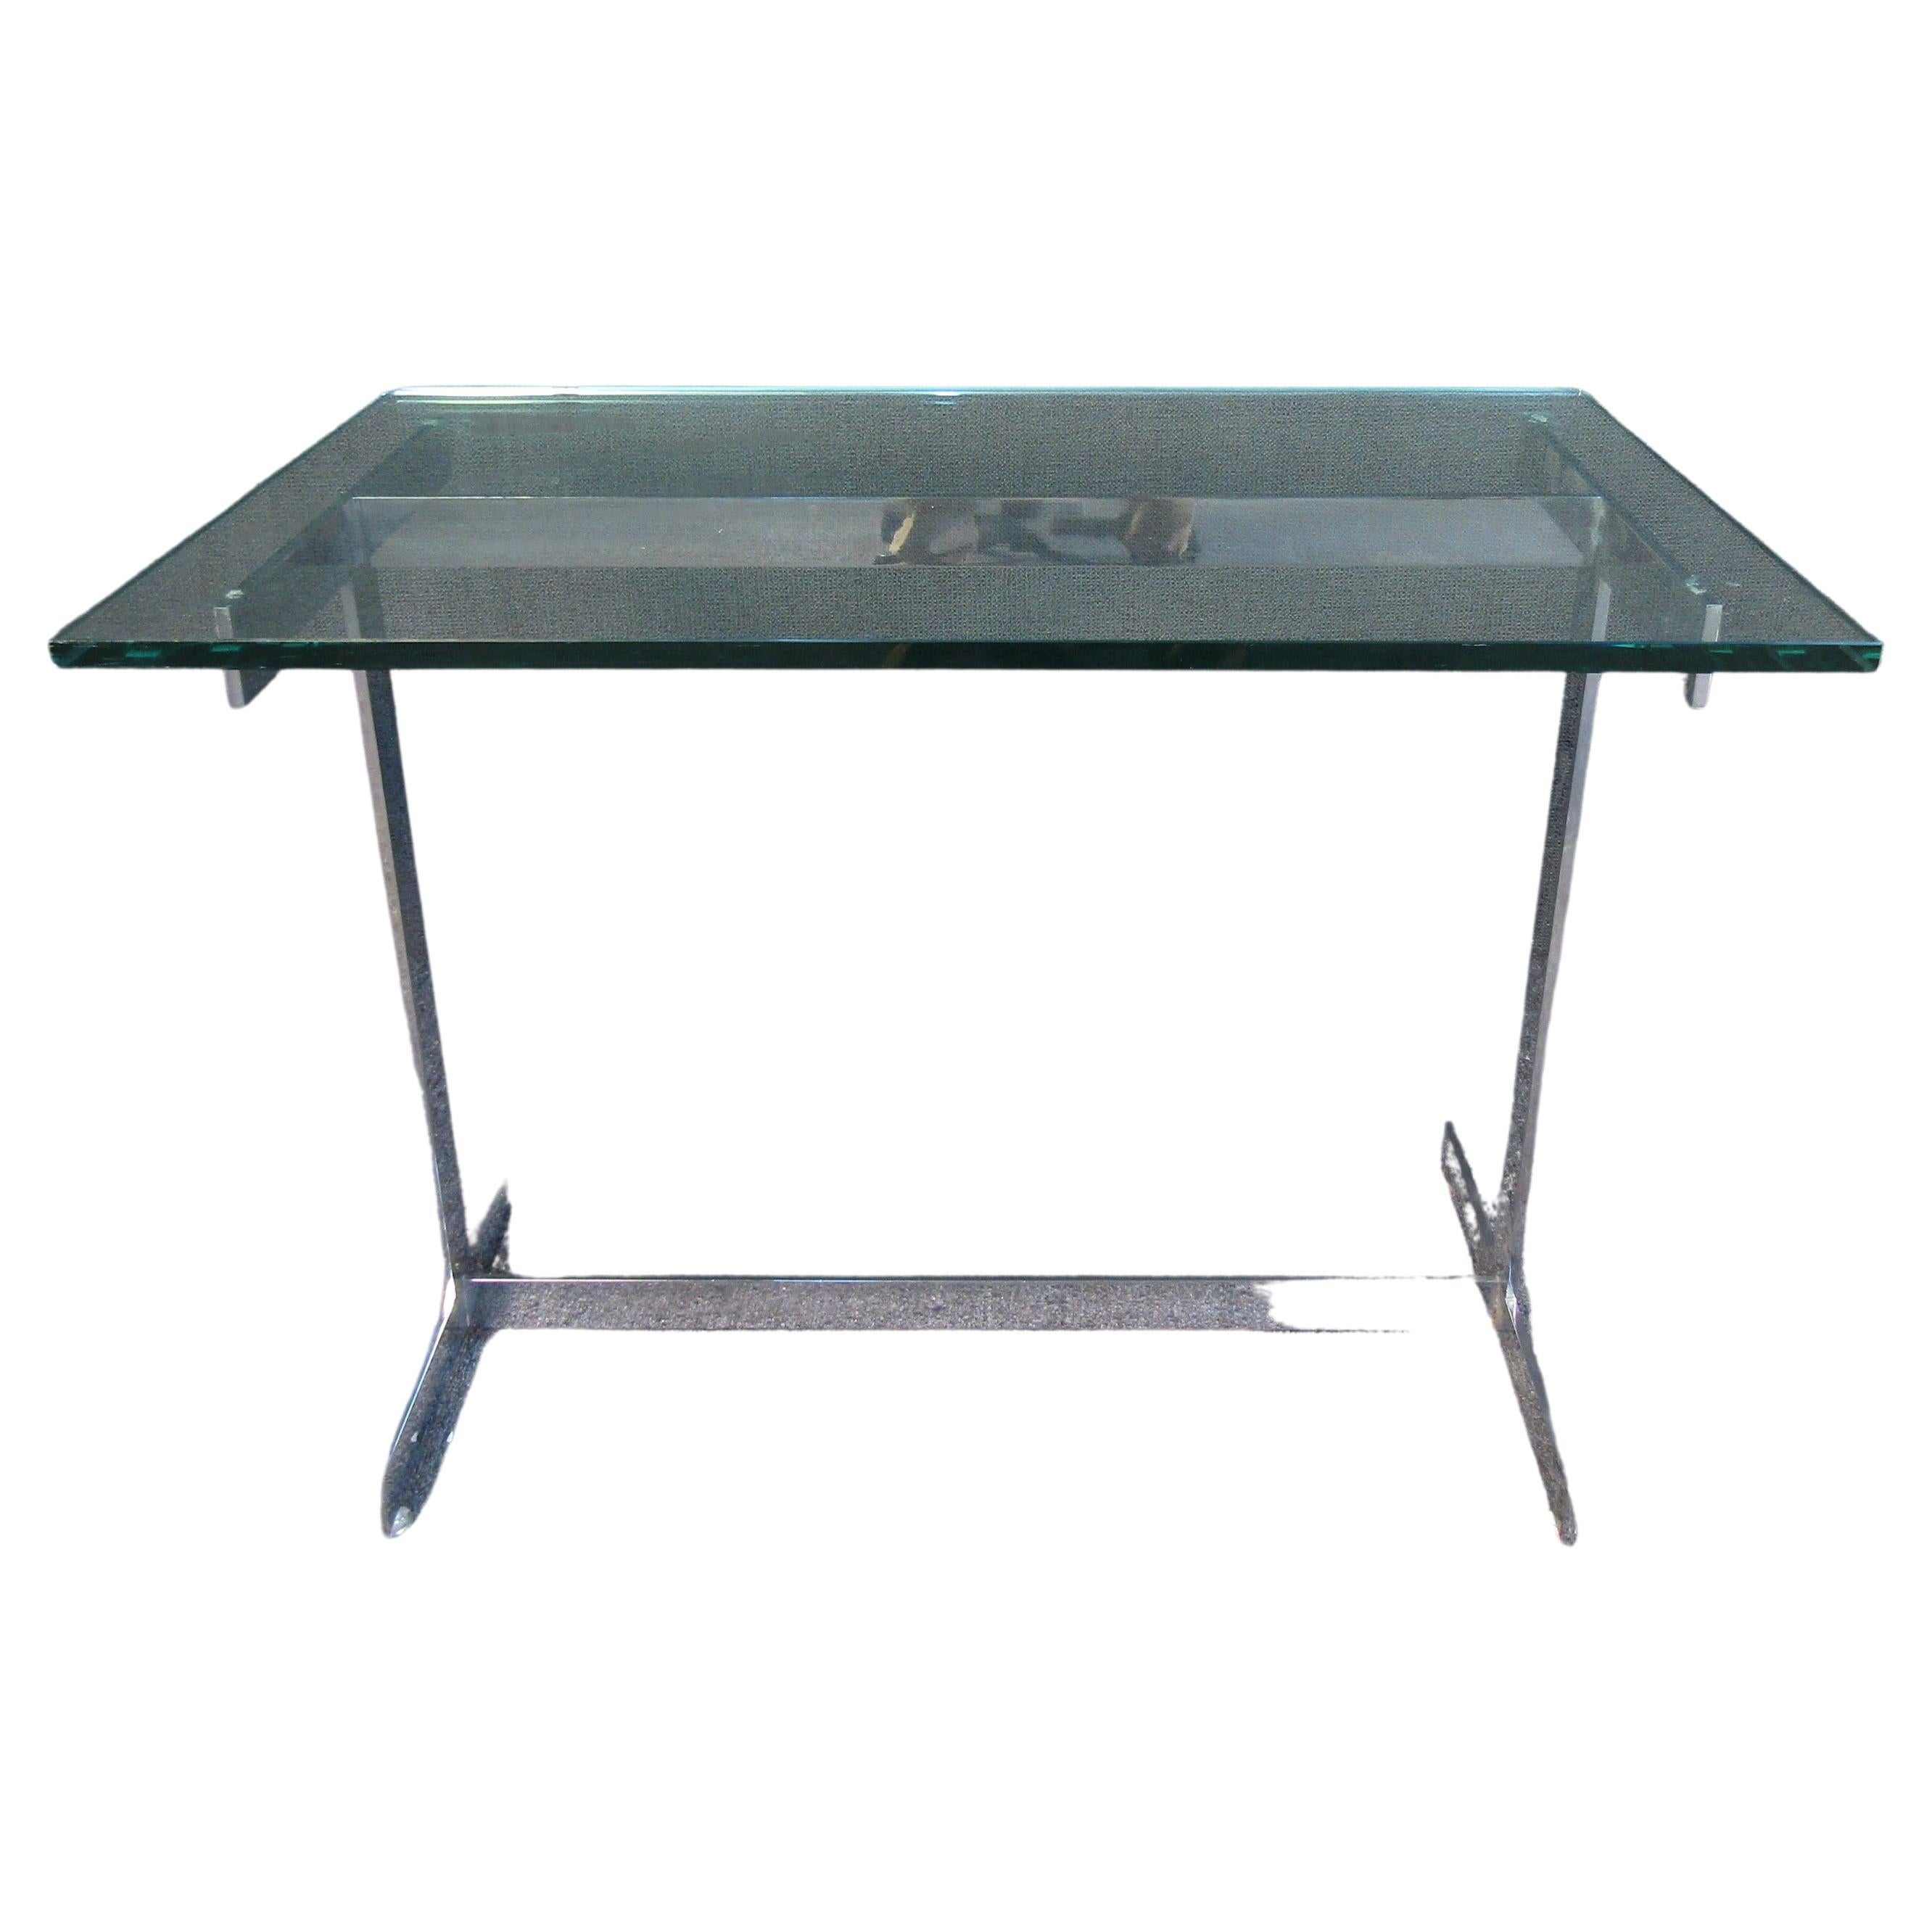 This elegant chrome and glass side table offers Mid-Century Modern style in the style of Milo Baughman. A thick glass top adds a touch of quality consistent with Mid-Century craftsmanship. Please confirm item location with seller (NY/NJ).